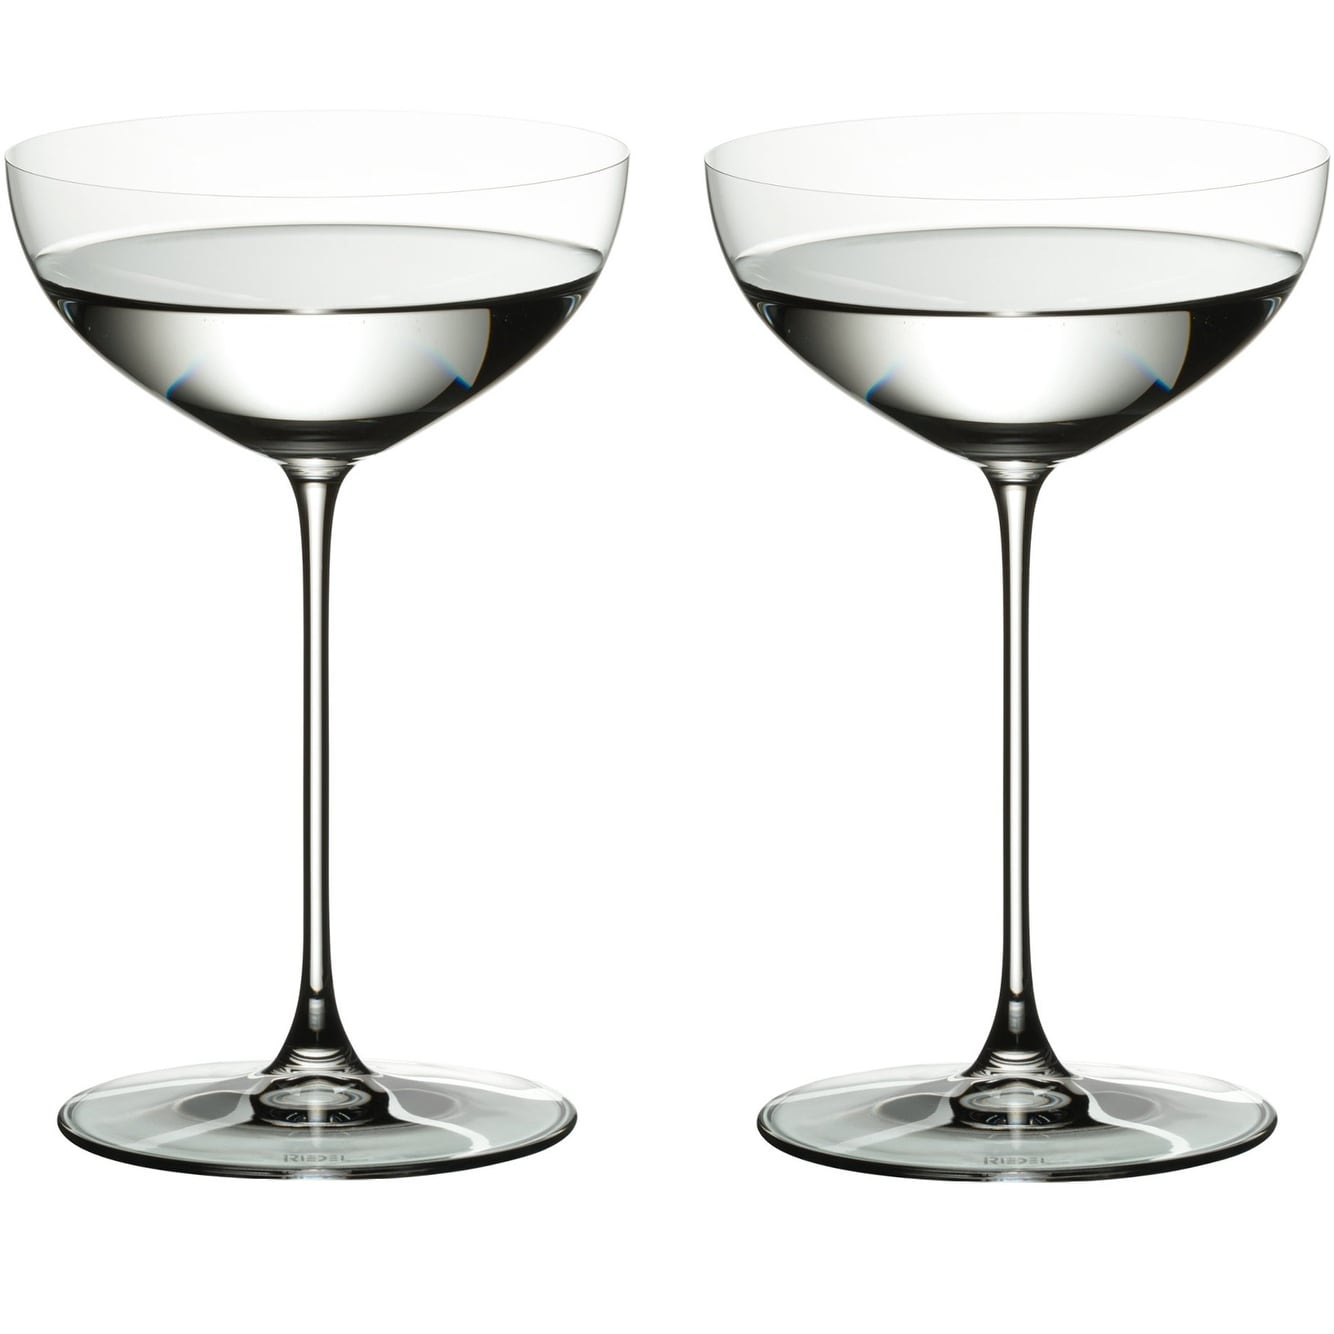 https://ak1.ostkcdn.com/images/products/is/images/direct/8445dadc84530b801d8096fd7fa0466197aa88c9/Riedel-Veritas-Moscato-Coupe-Martini-Glass-%284Pk%29-with-Pourer-and-Cloth.jpg